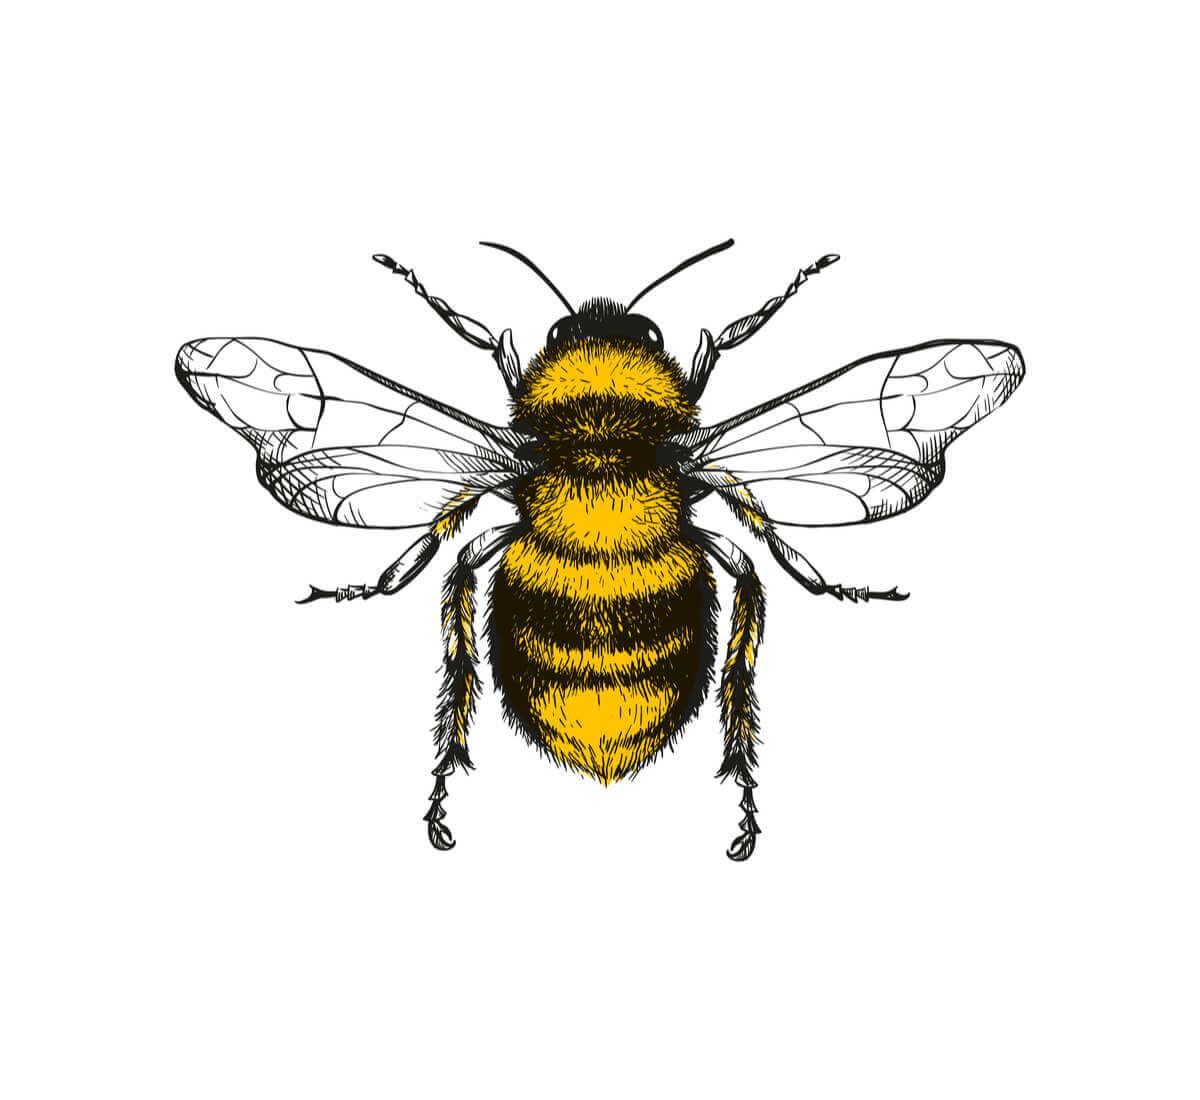 A drawing of a bee.